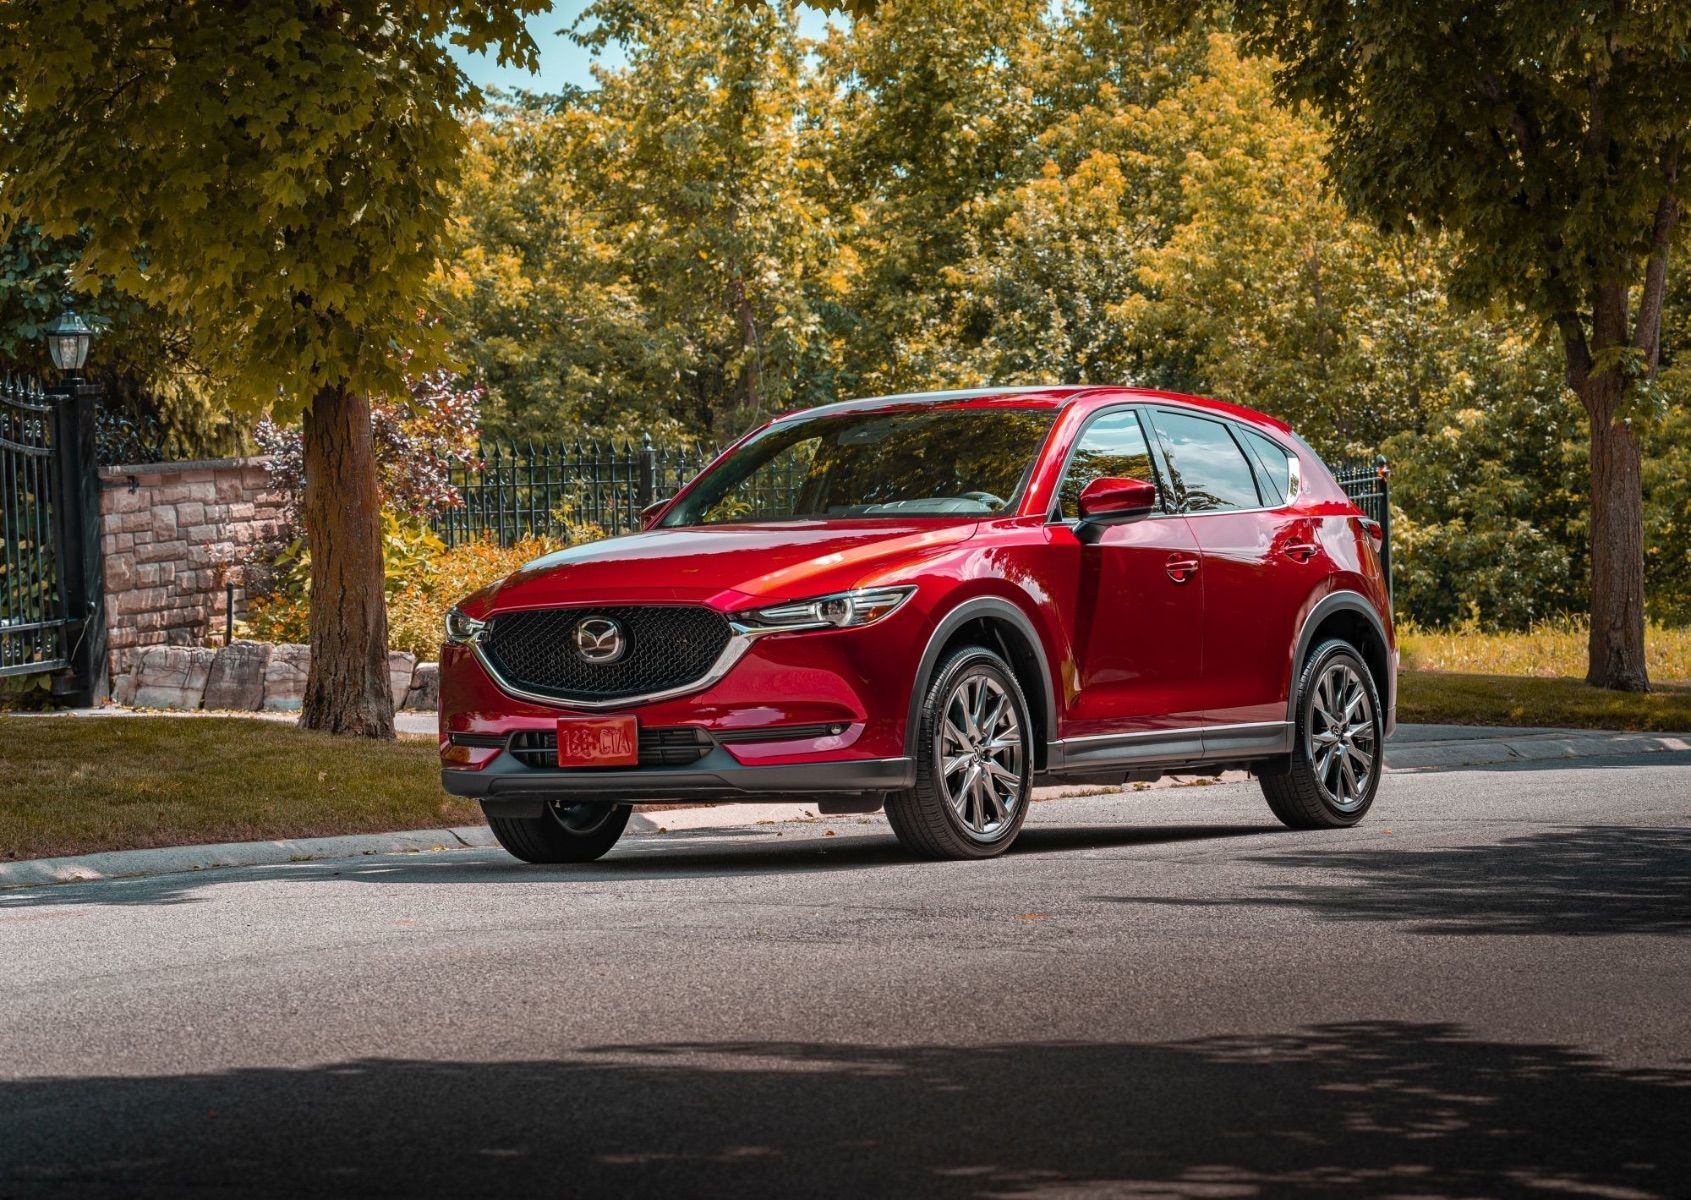 Rare, Powerful, Efficient, Luxurious: The 2019 Mazda CX-5 Signature Diesel Is A Go For August